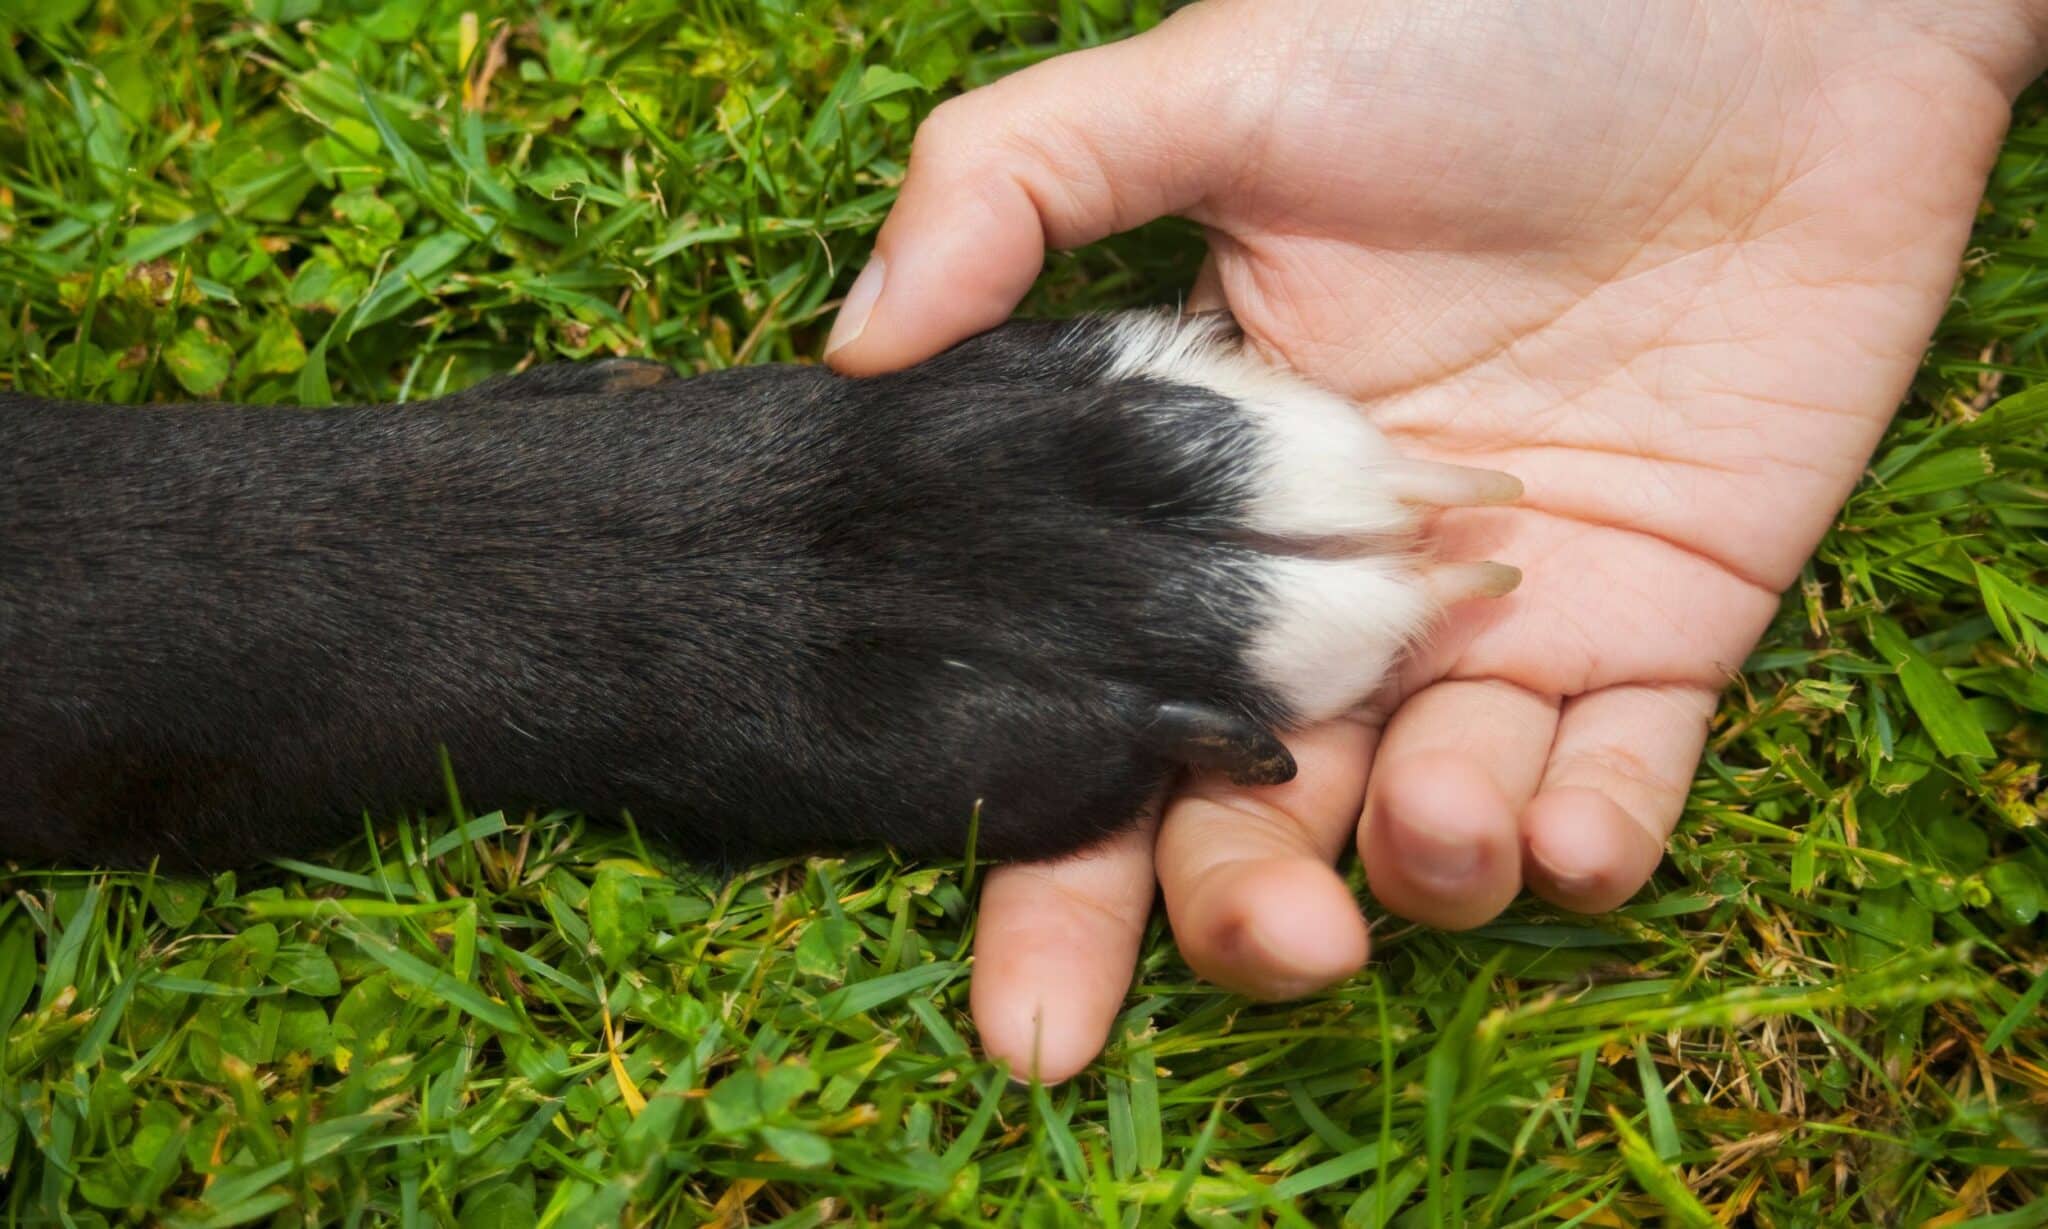 Why Does Your Dog Put Their Paws On You?